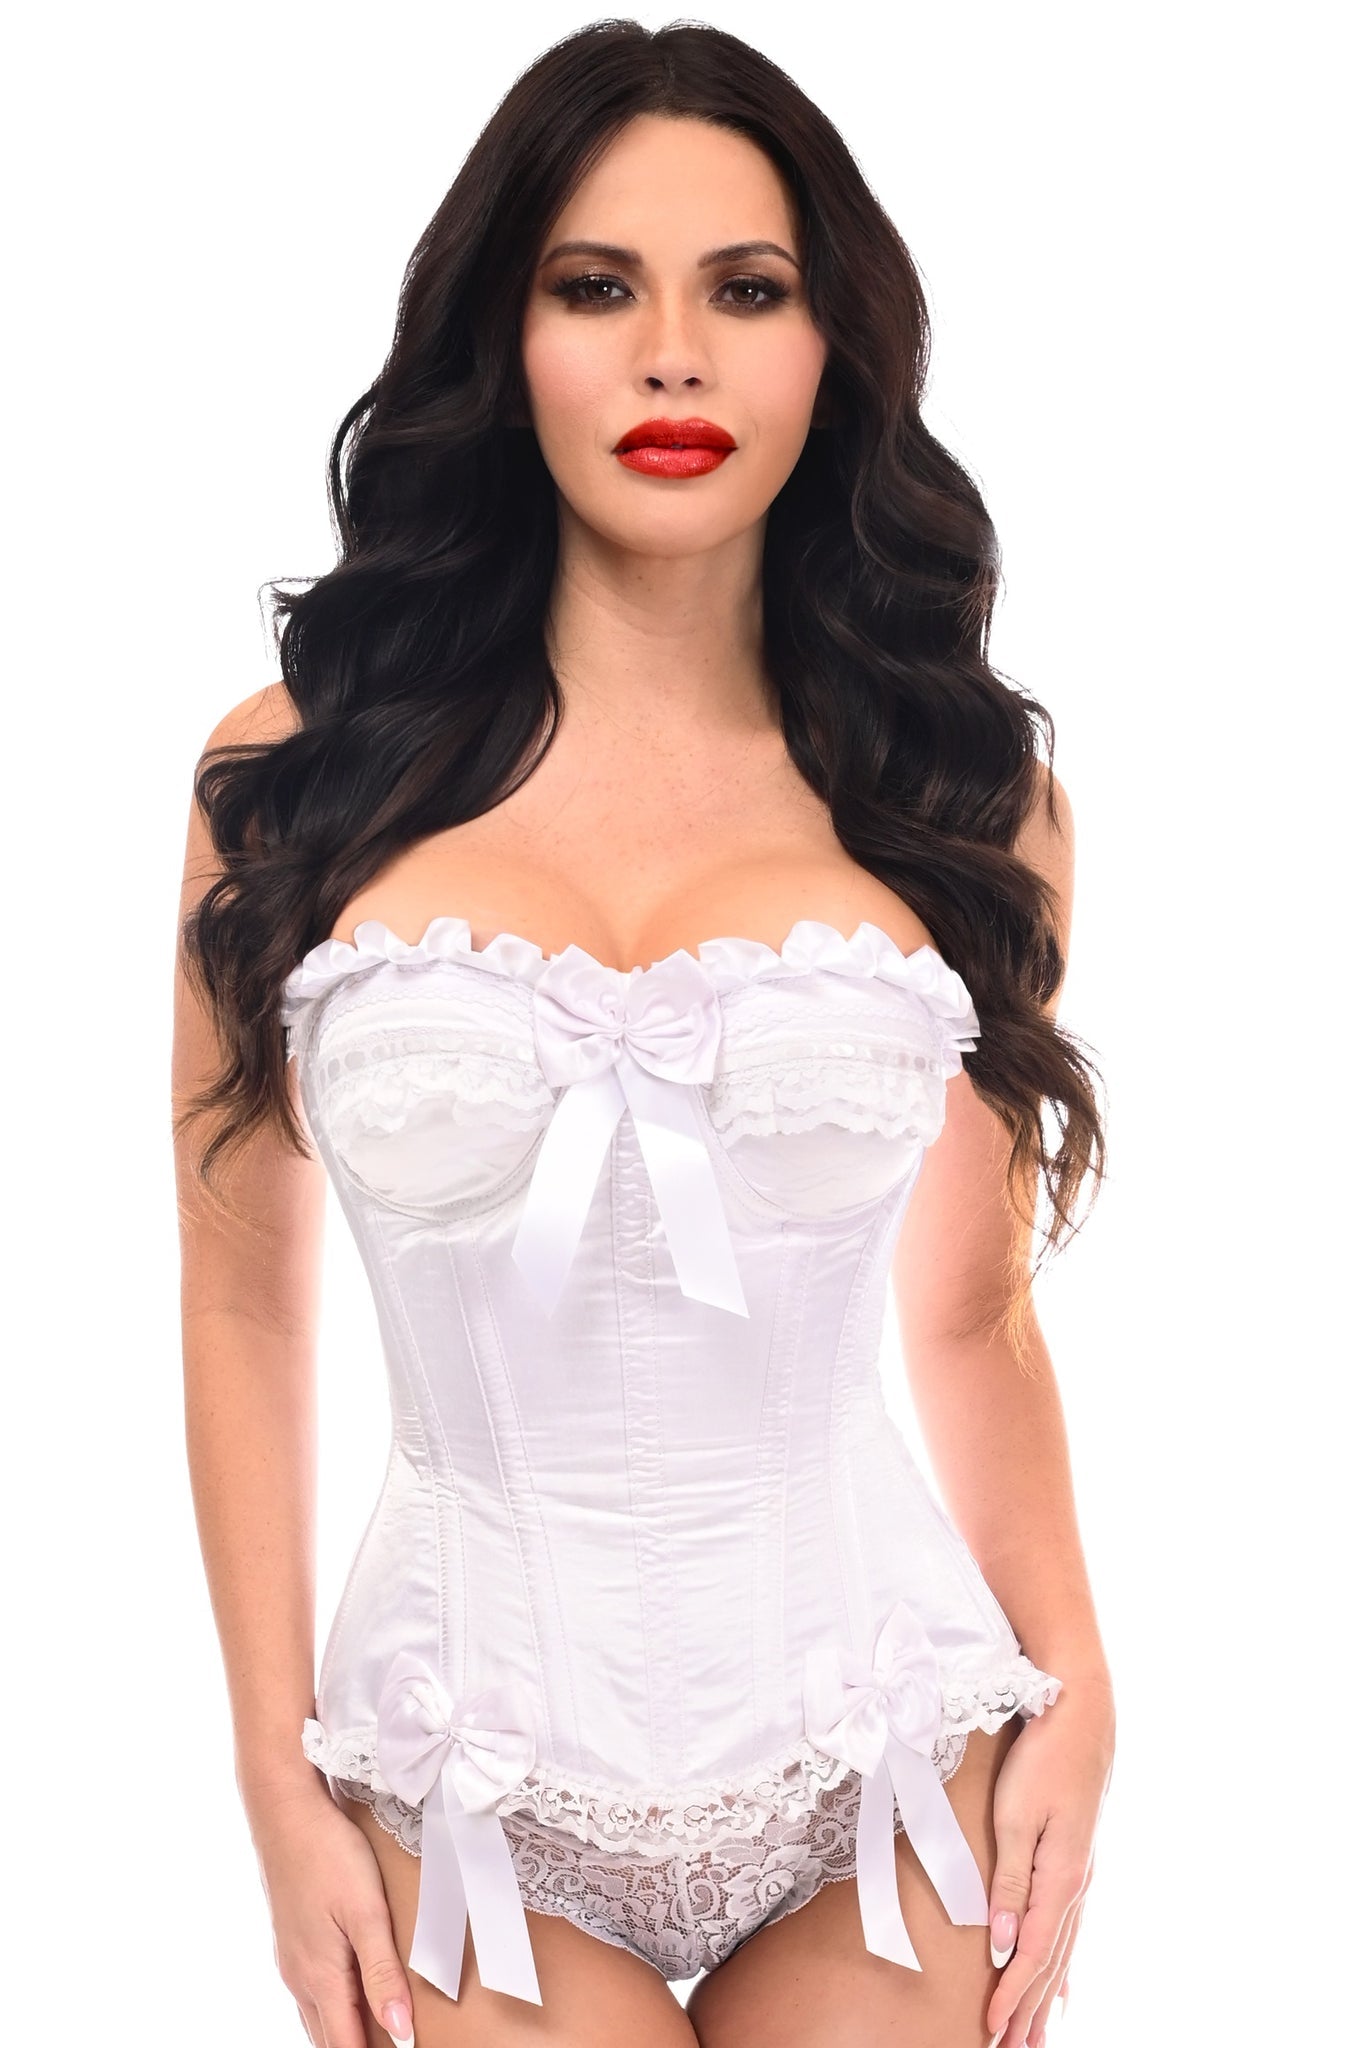 Top Drawer Satin Steel Boned Overbust Corset by Daisy Corsets in 3 Color Choices in Size S, M, L, XL, 2X, 3X, 4X, 5X, or 6X